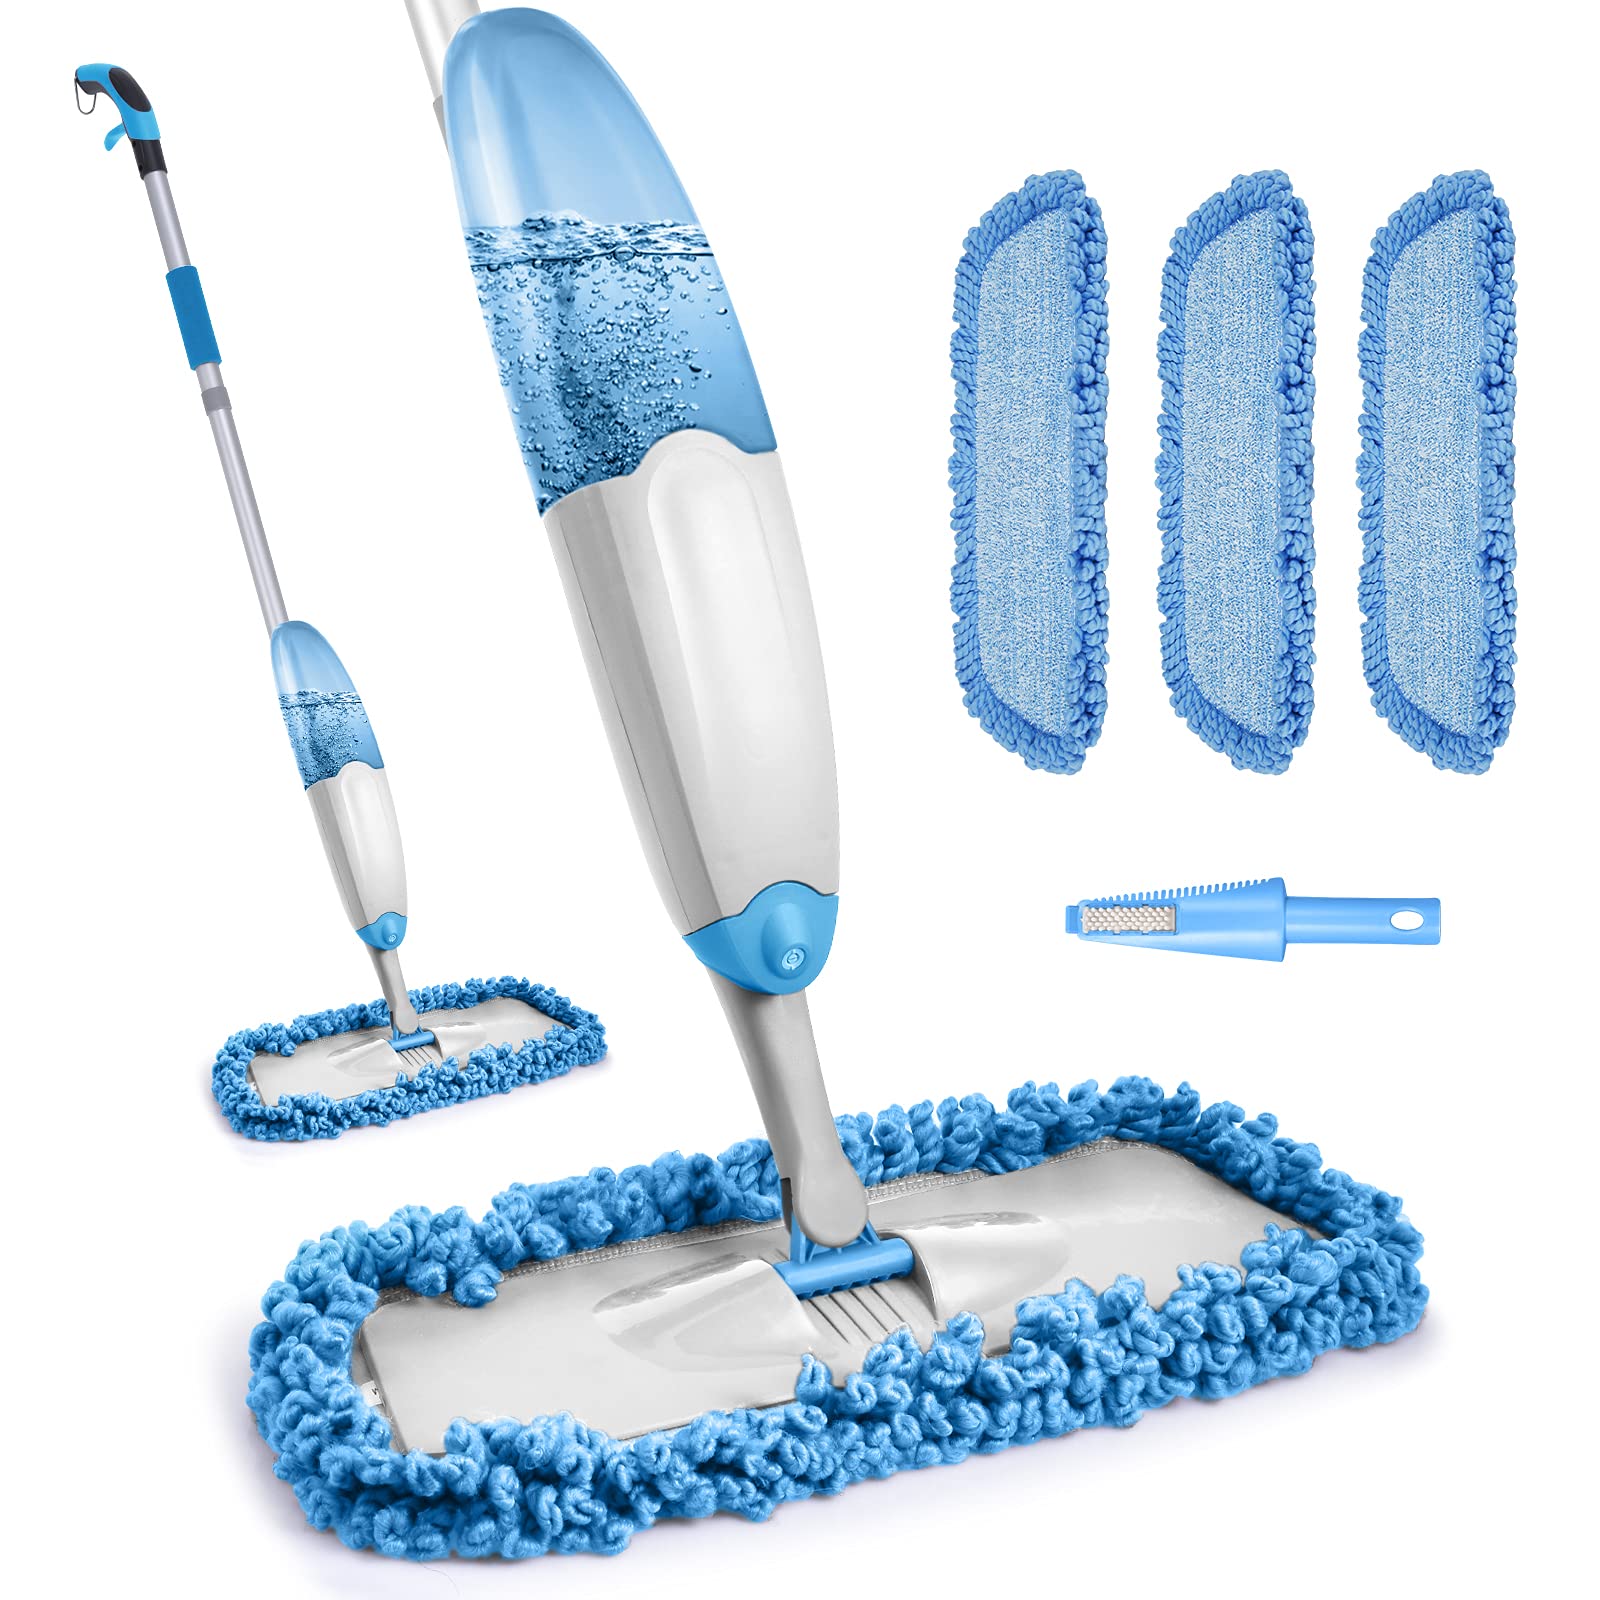 DR DAPPER EASYMIST Spray Mop, Dust Mop for Floor Cleaning, Wet Spray Mop  with 700ML Refillable Bottle, 3 Washable Double-Sided Pads & 2 Mop Scrub